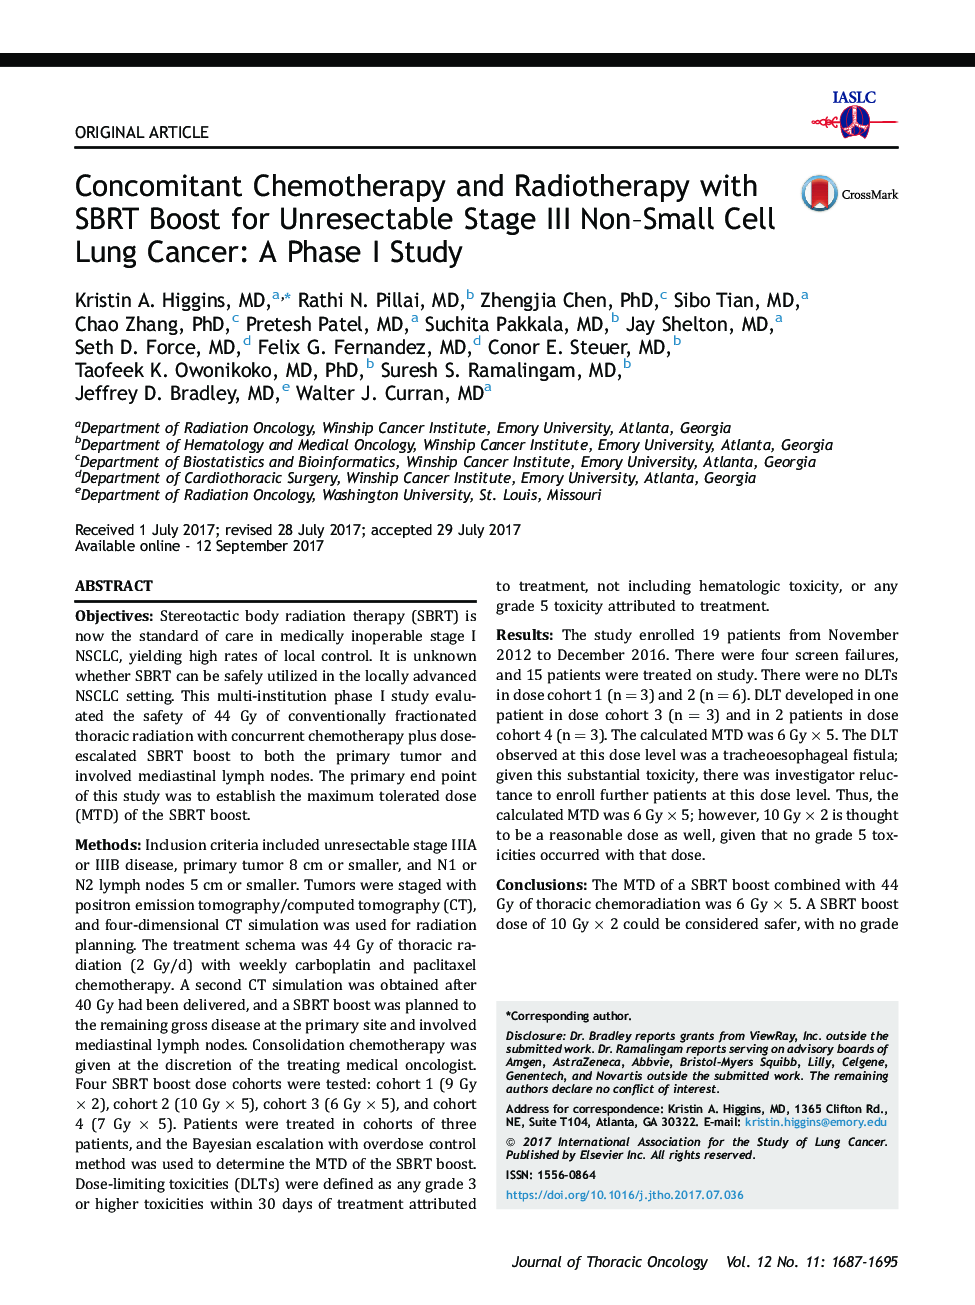 Concomitant Chemotherapy and Radiotherapy with SBRT Boost for Unresectable Stage III Non-Small Cell Lung Cancer: A Phase I Study